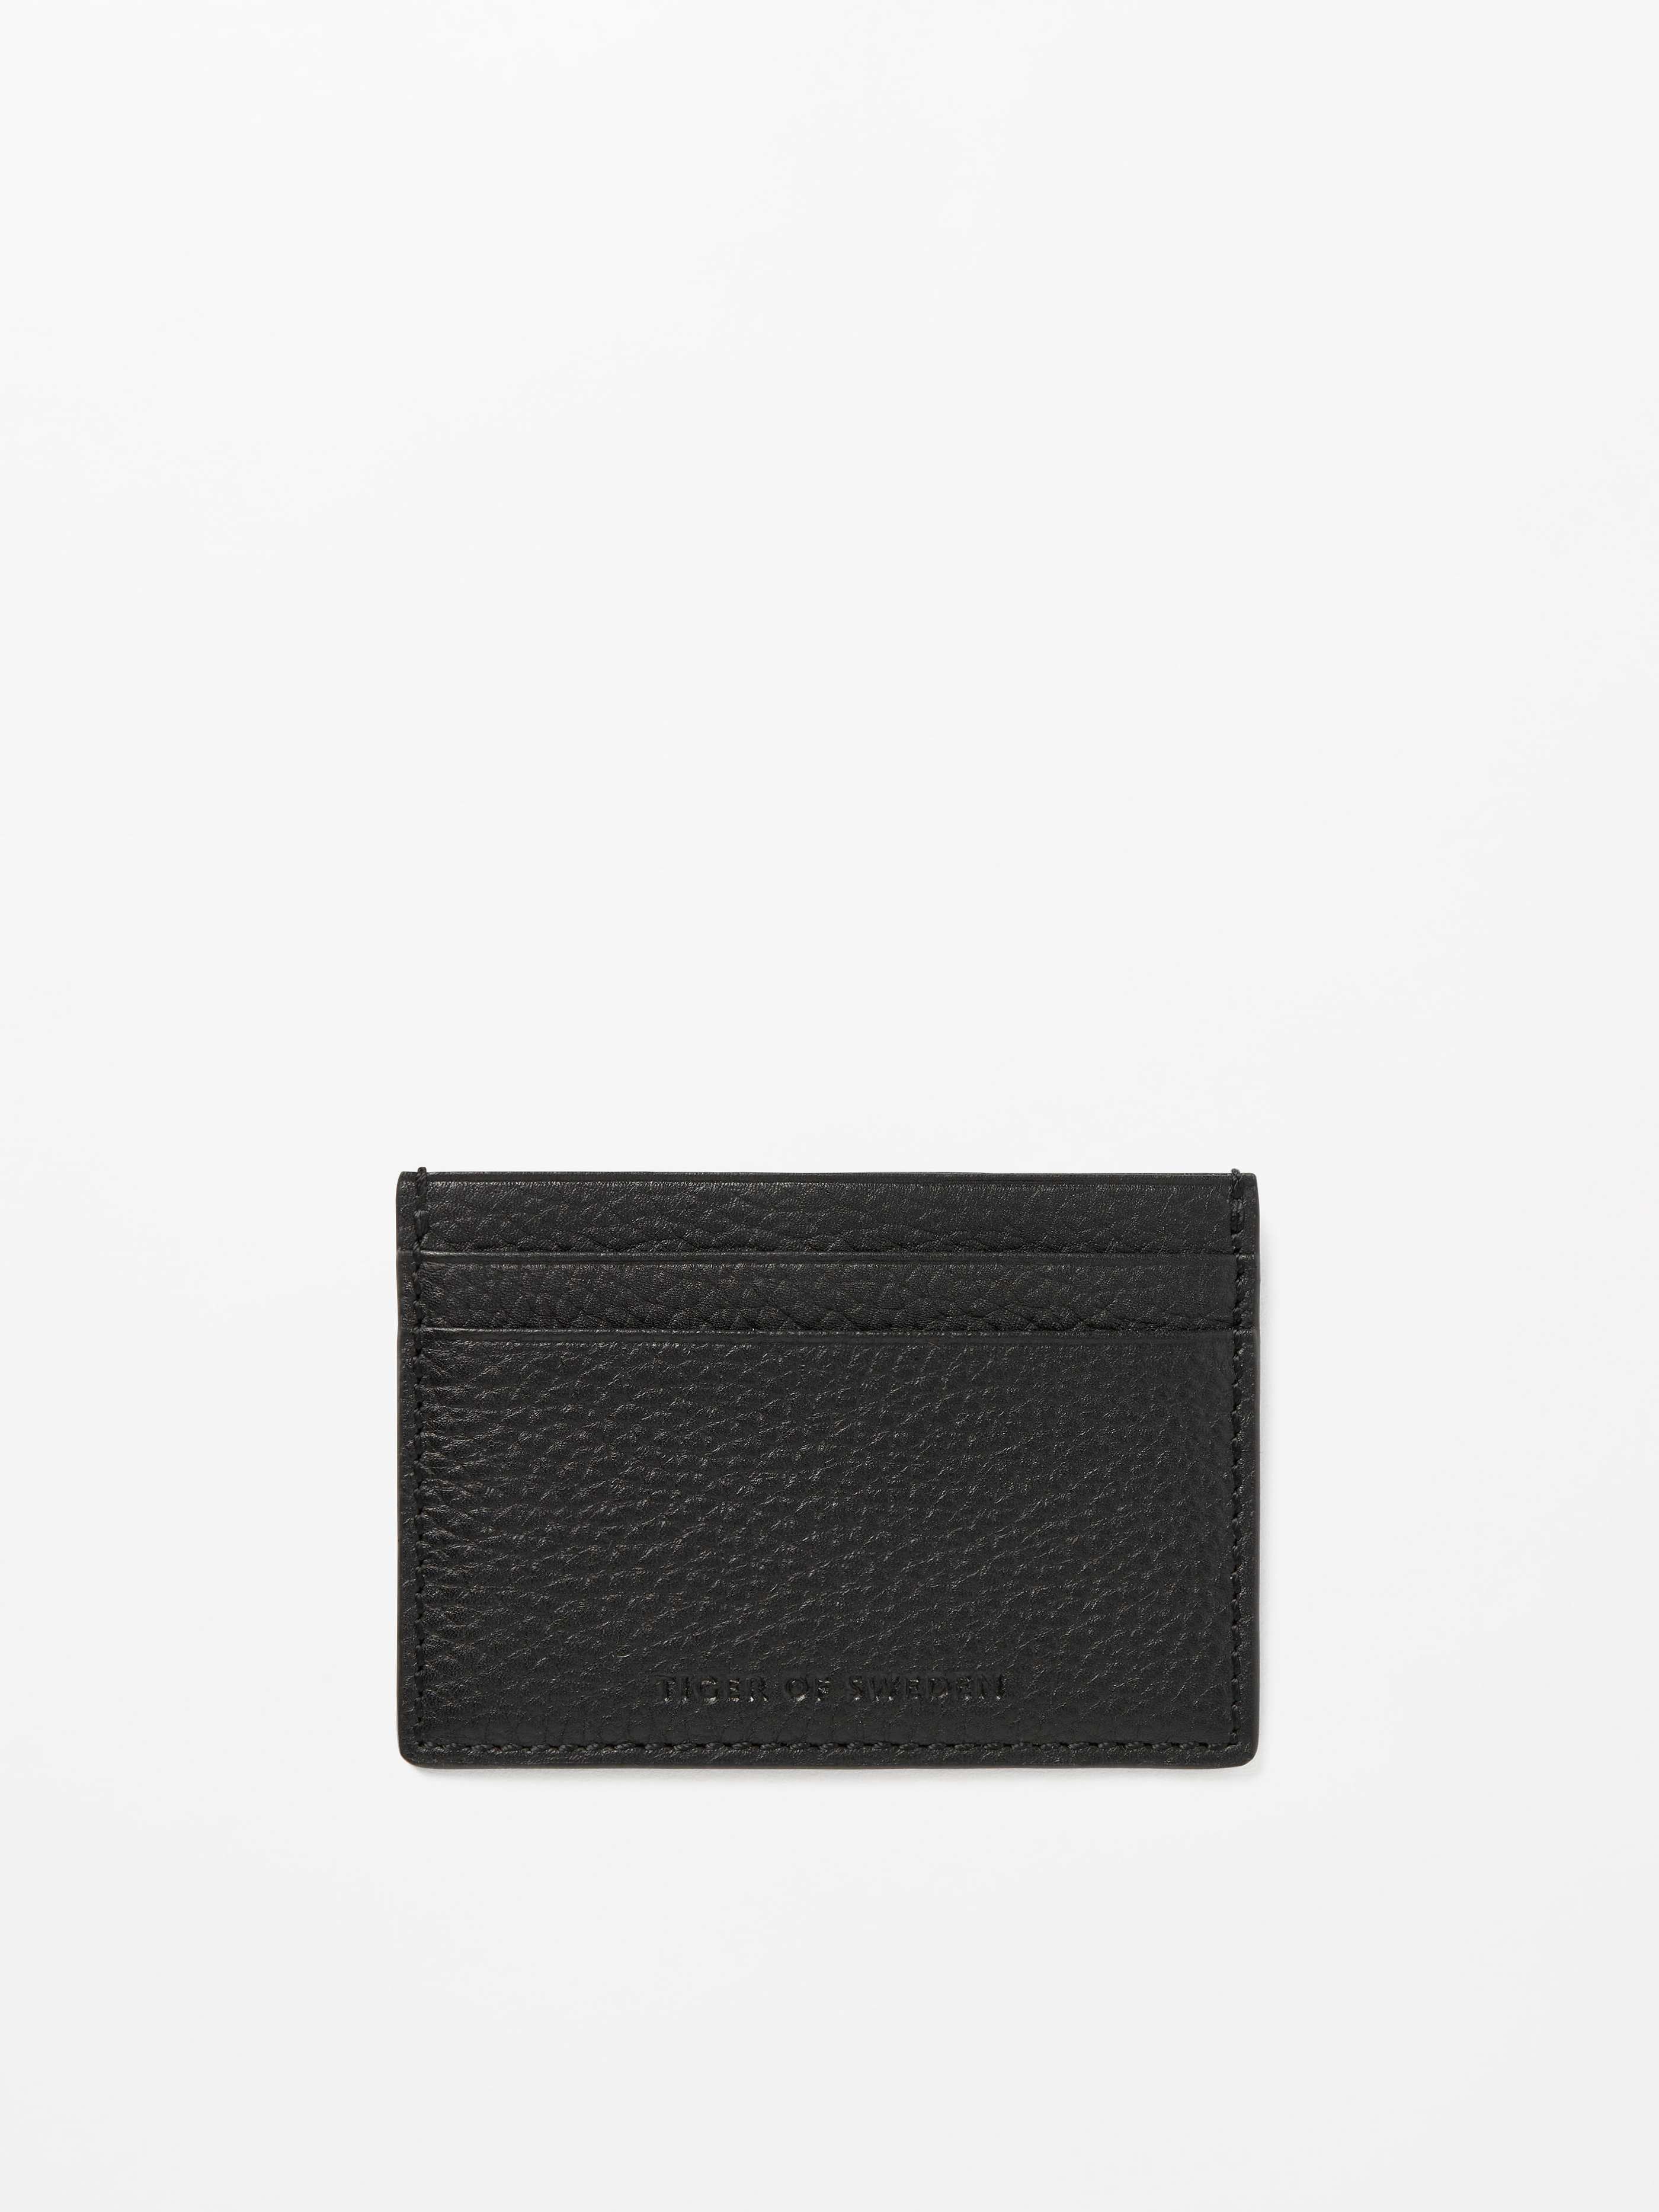 TIGER OF SWEDEN WAKE CARDHOLDER IN BLACK U69380009Z 050 | Shop from eightywingold an official brand partner for TIGER OF SWEDEN CANADA & US